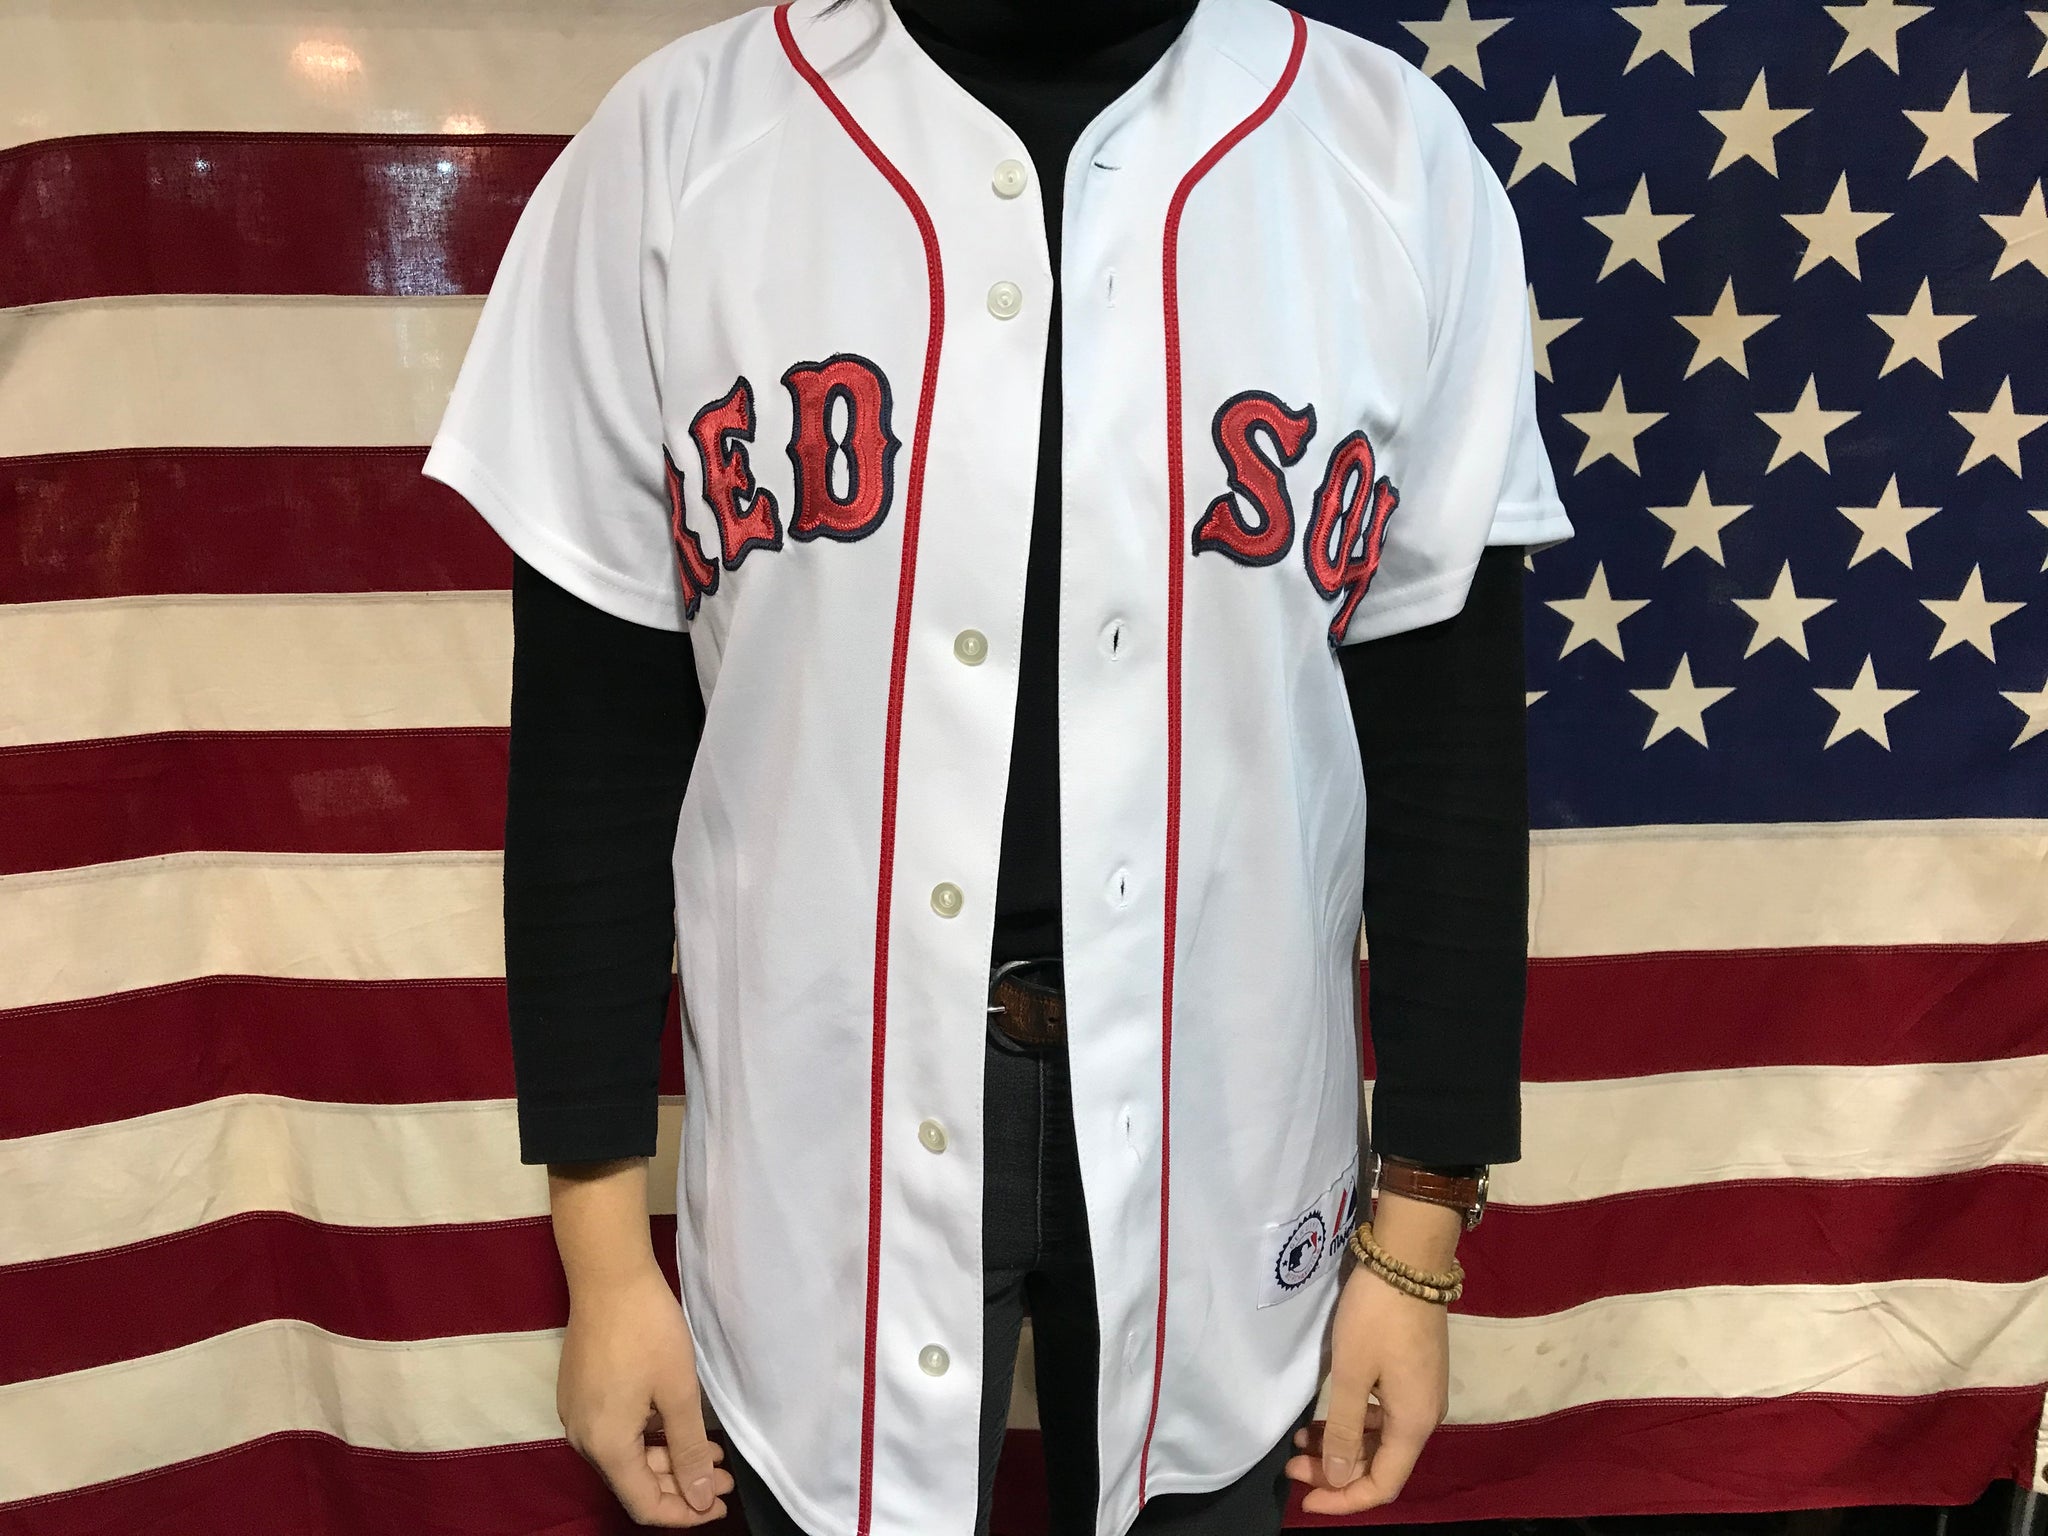 Vintage Red Sox 90s Dynasty Jersey 